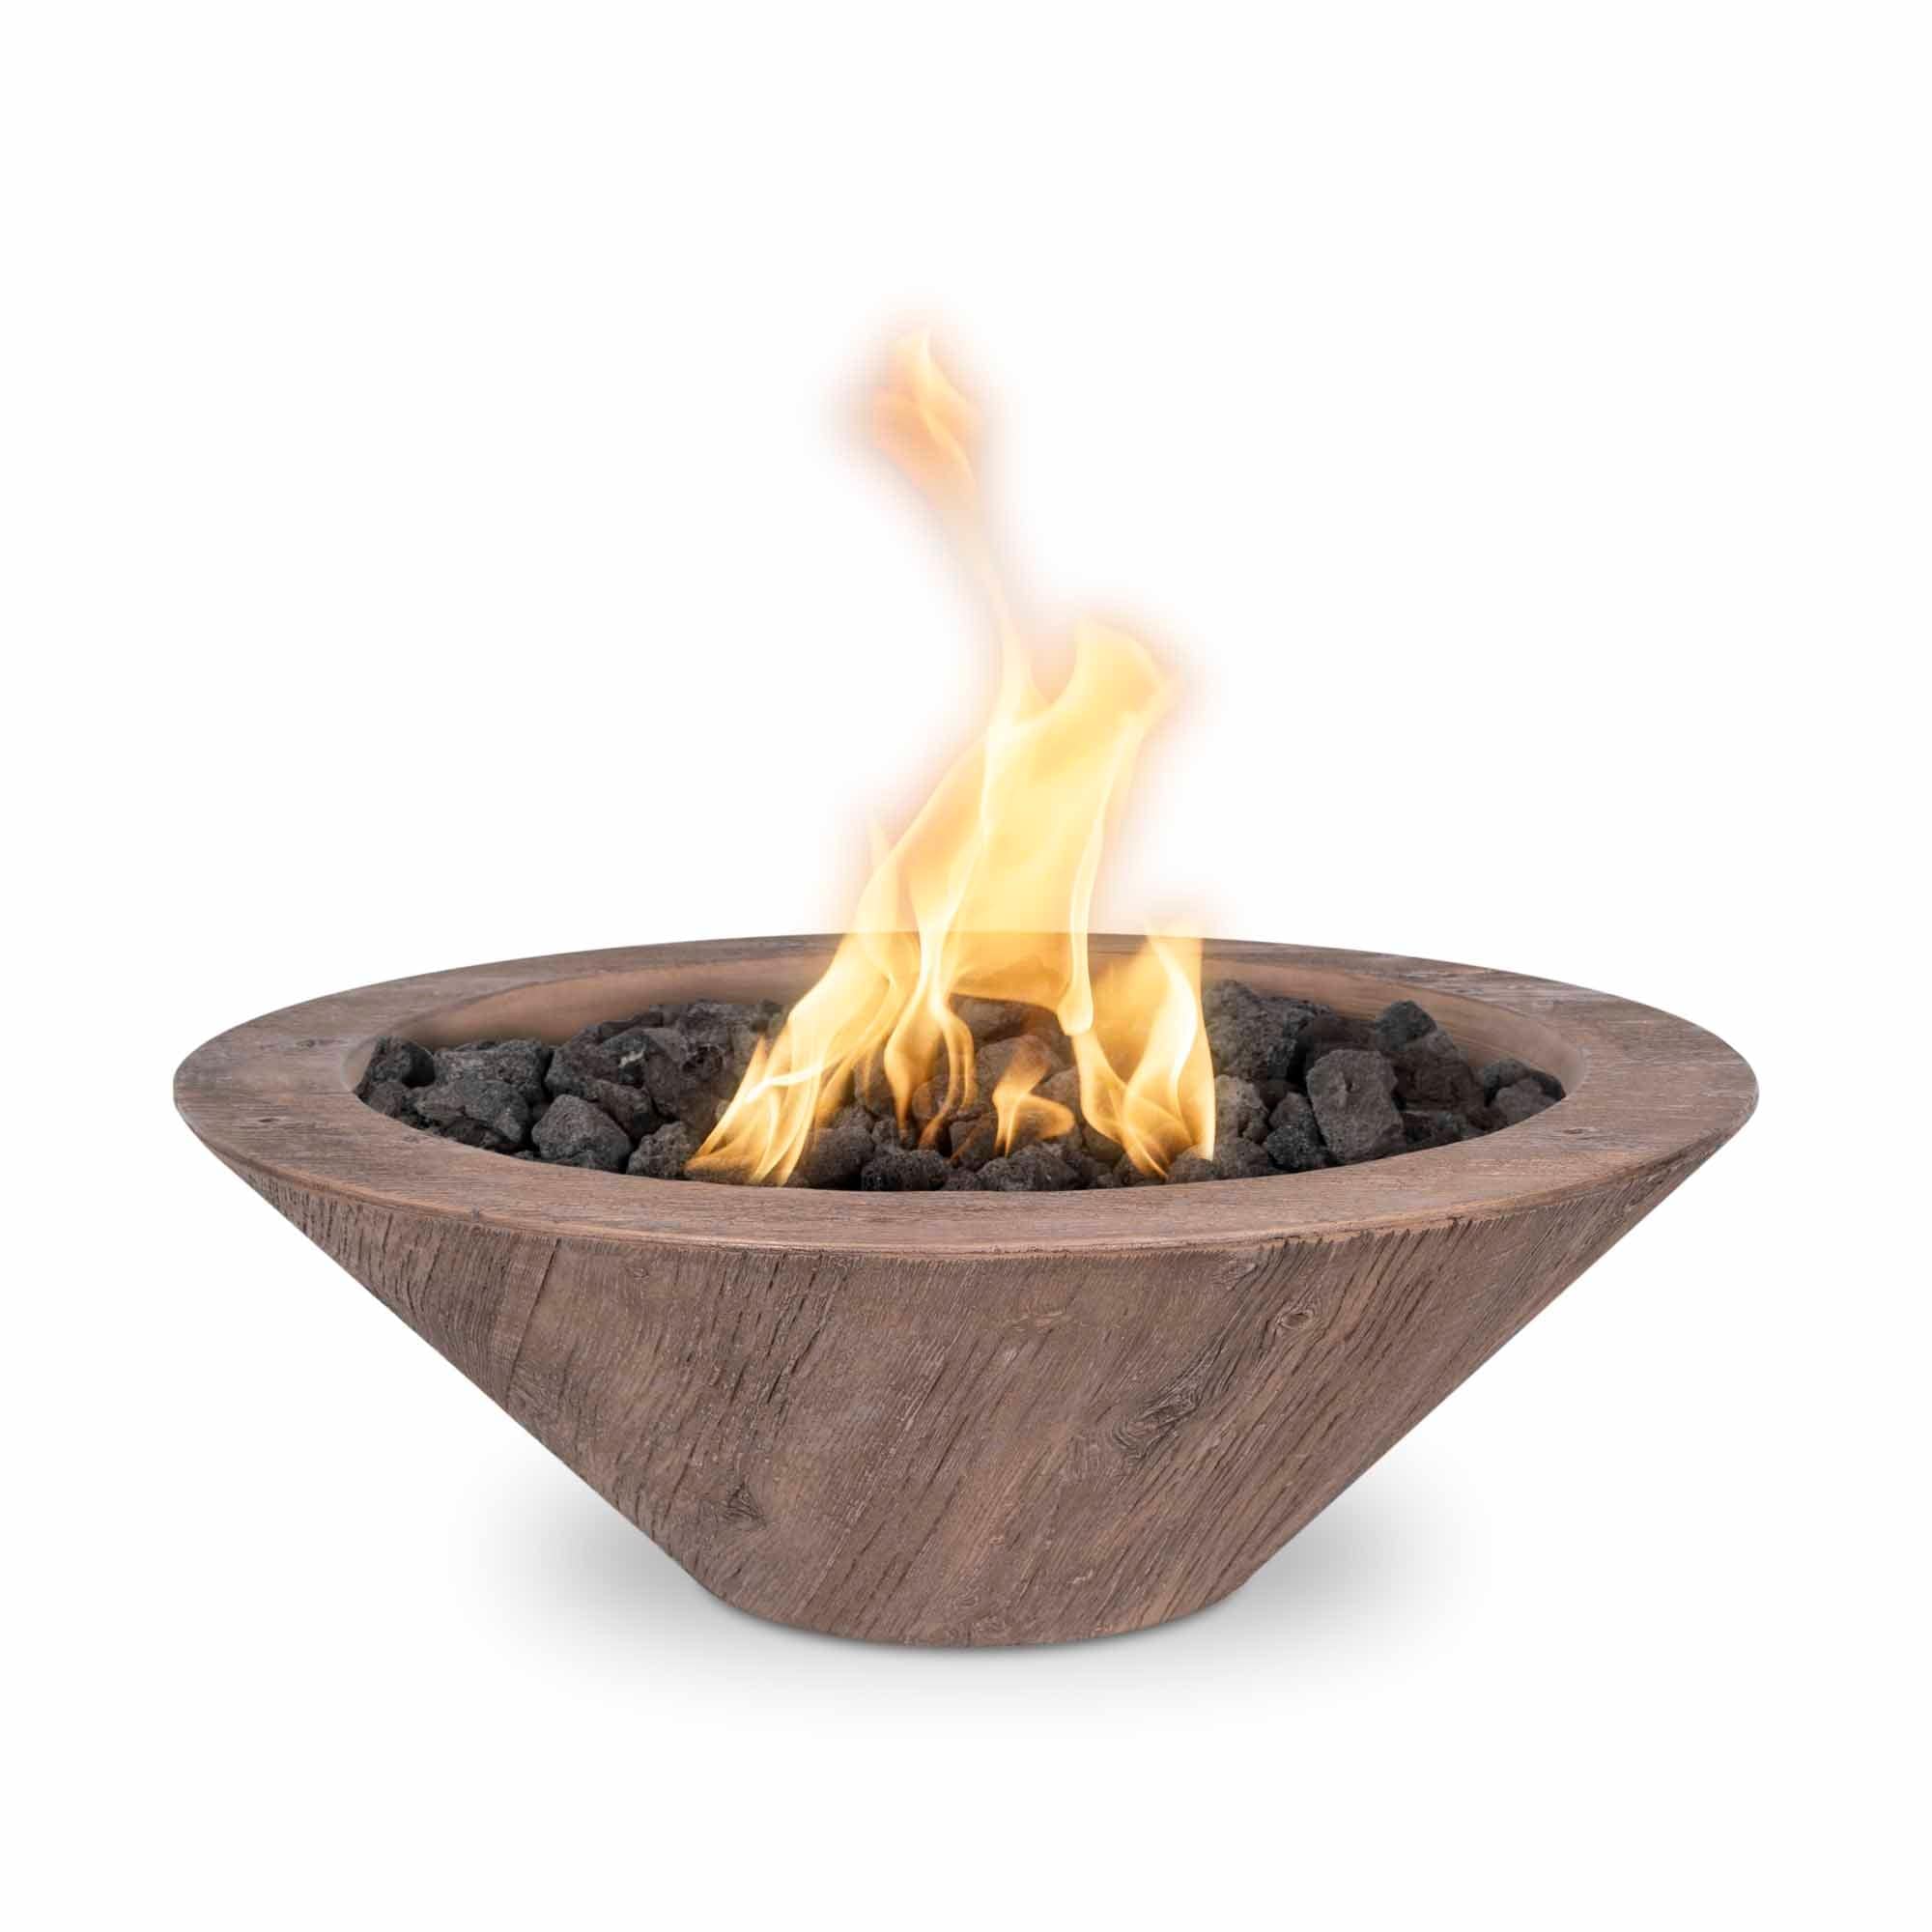 The Outdoor Plus Fire Bowl 24" / Match Lit The Outdoor Plus Cazo Cazo Fire Bowl | Wood Grain Concrete OPT-24RWGFO